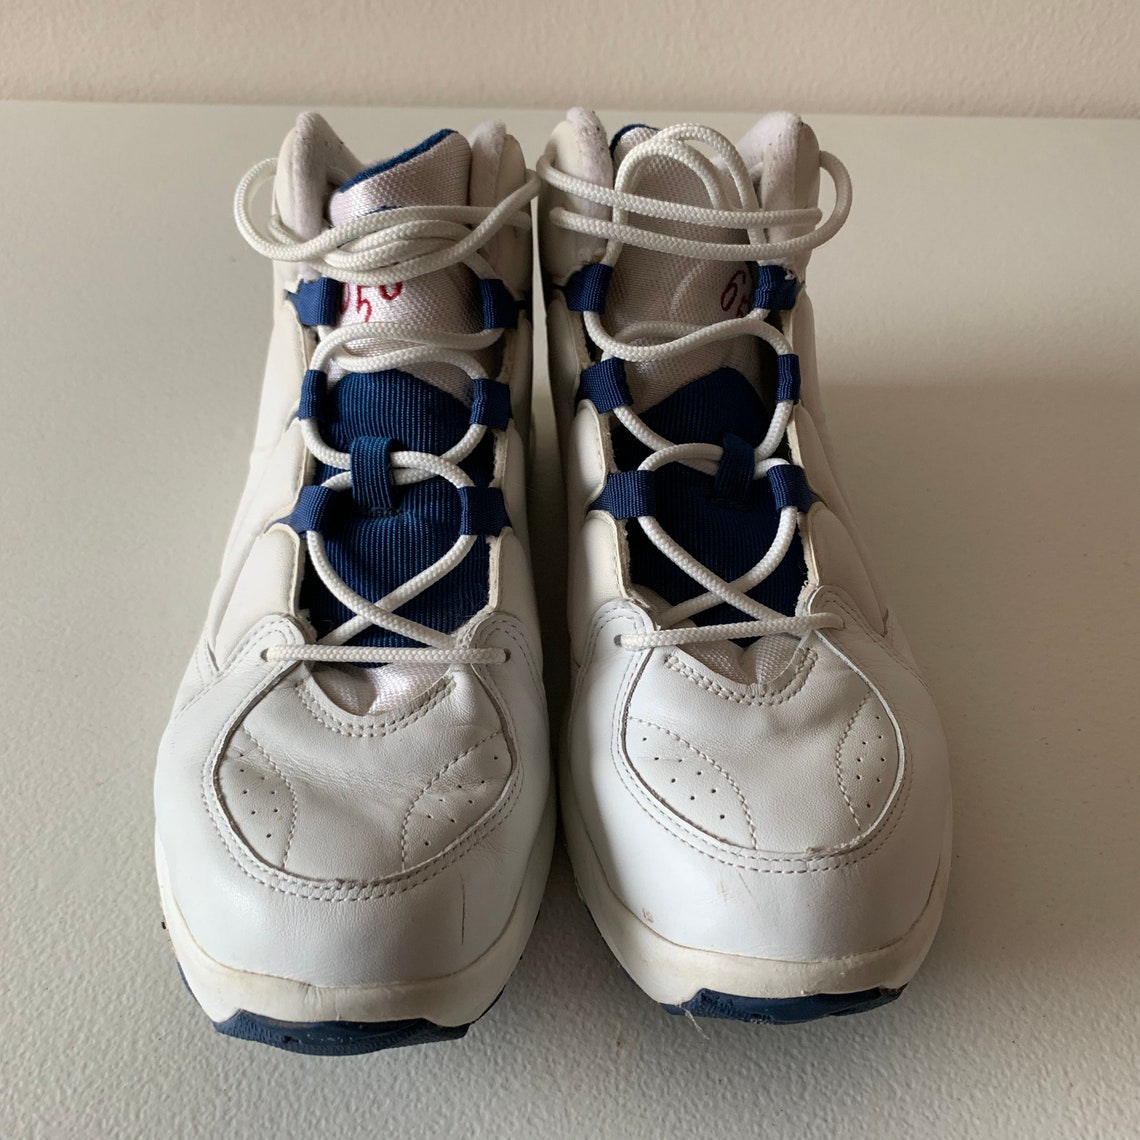 Avia 650 Vintage Aerobic Fitness Shoes White Blue Red | Etsy